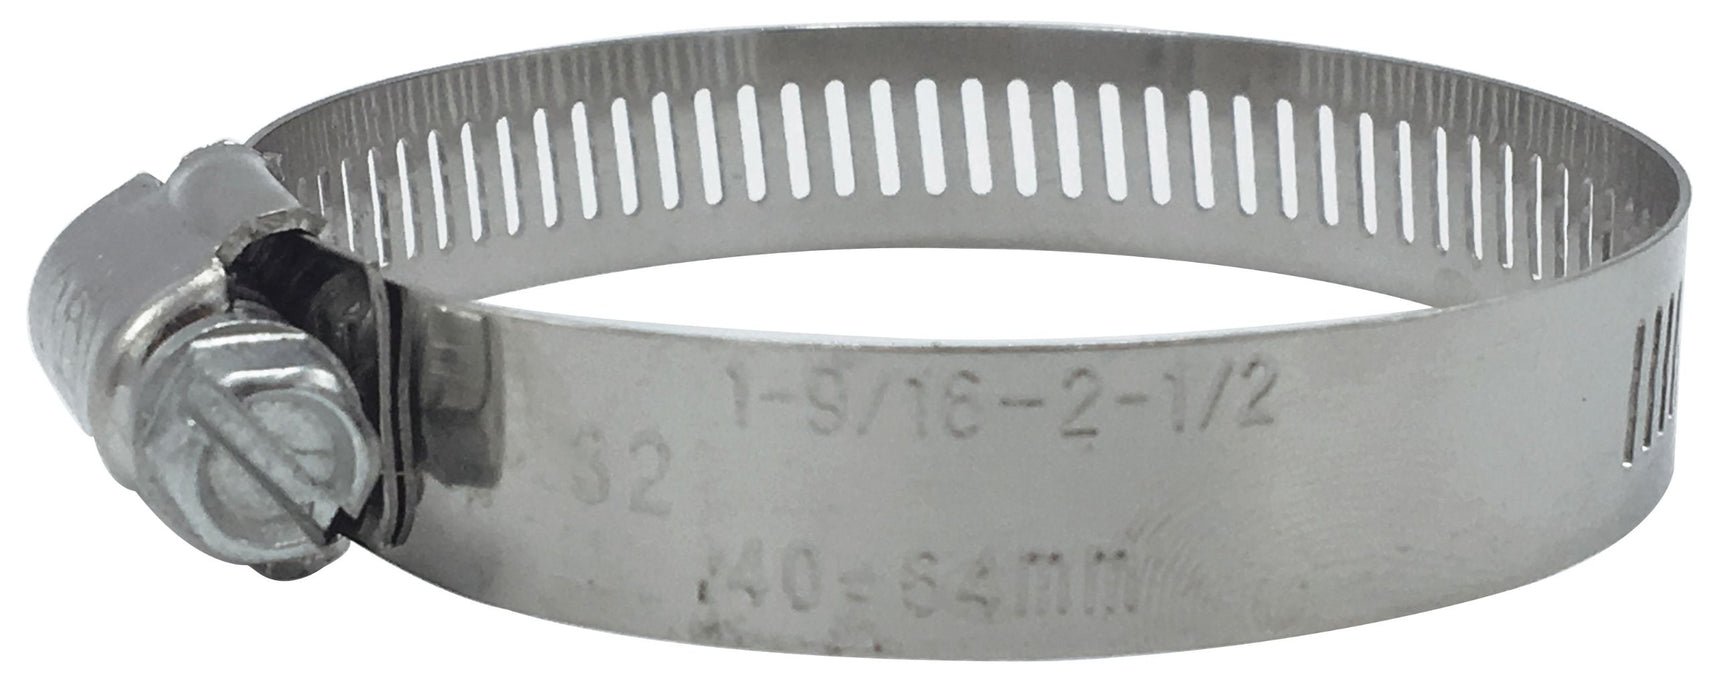 #32 1 1/2 Stainless Hose Clamp With Carbon Screw